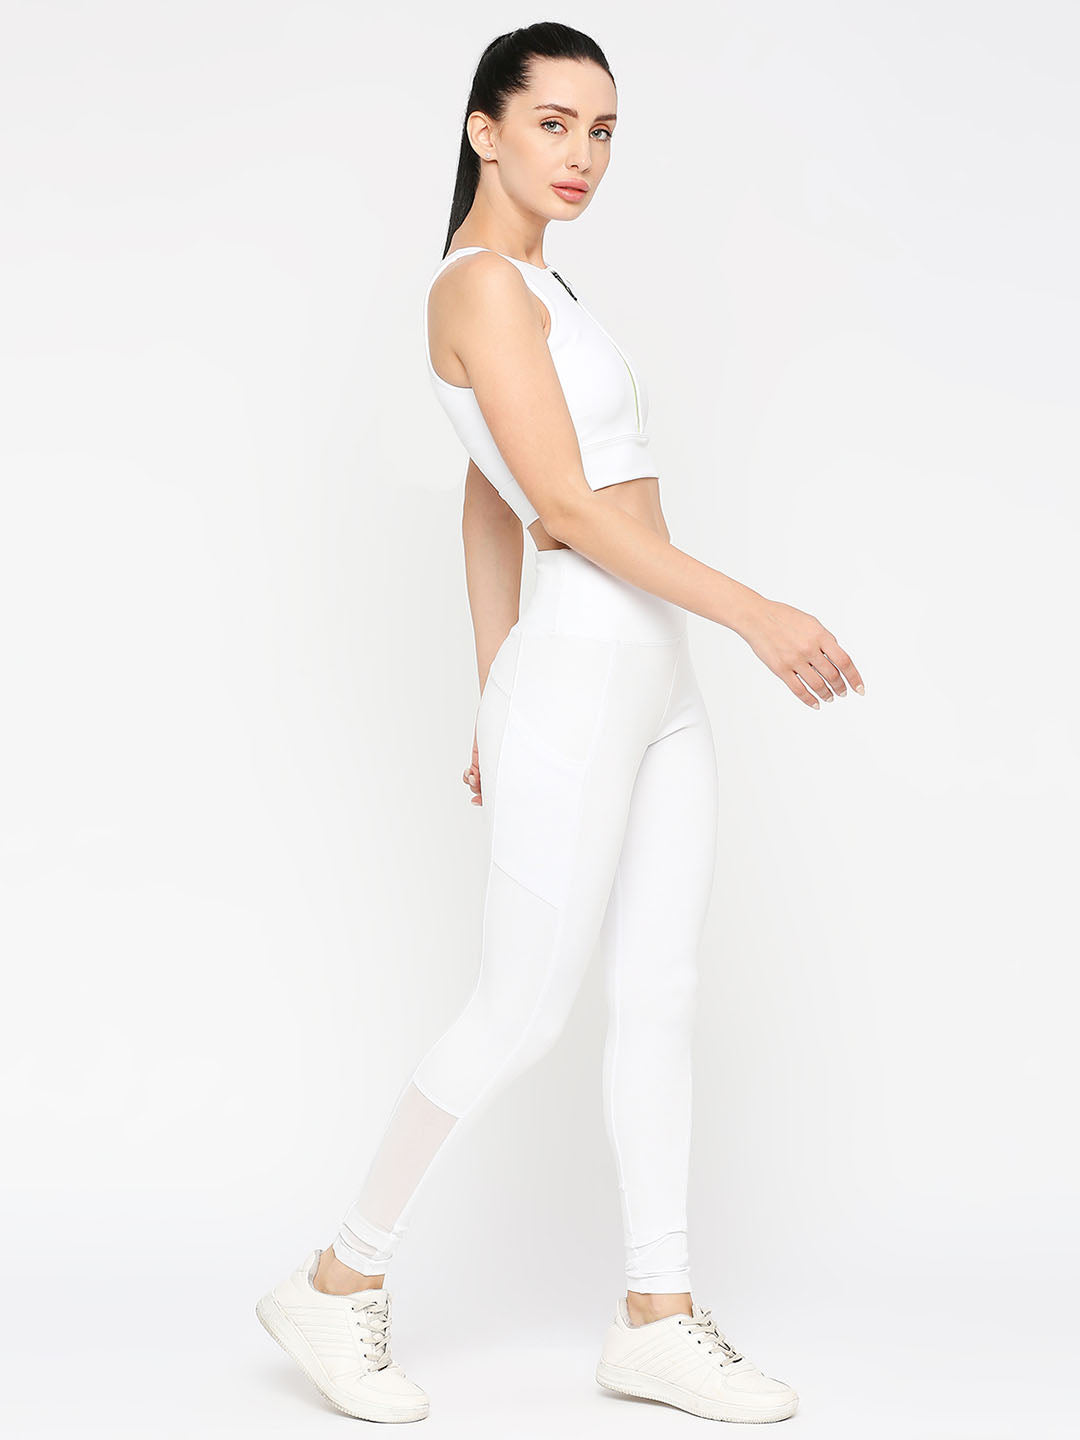 Girl In White Blank Leggings And A Crop Top. Mock-up. Stock Photo, Picture  and Royalty Free Image. Image 141782041.